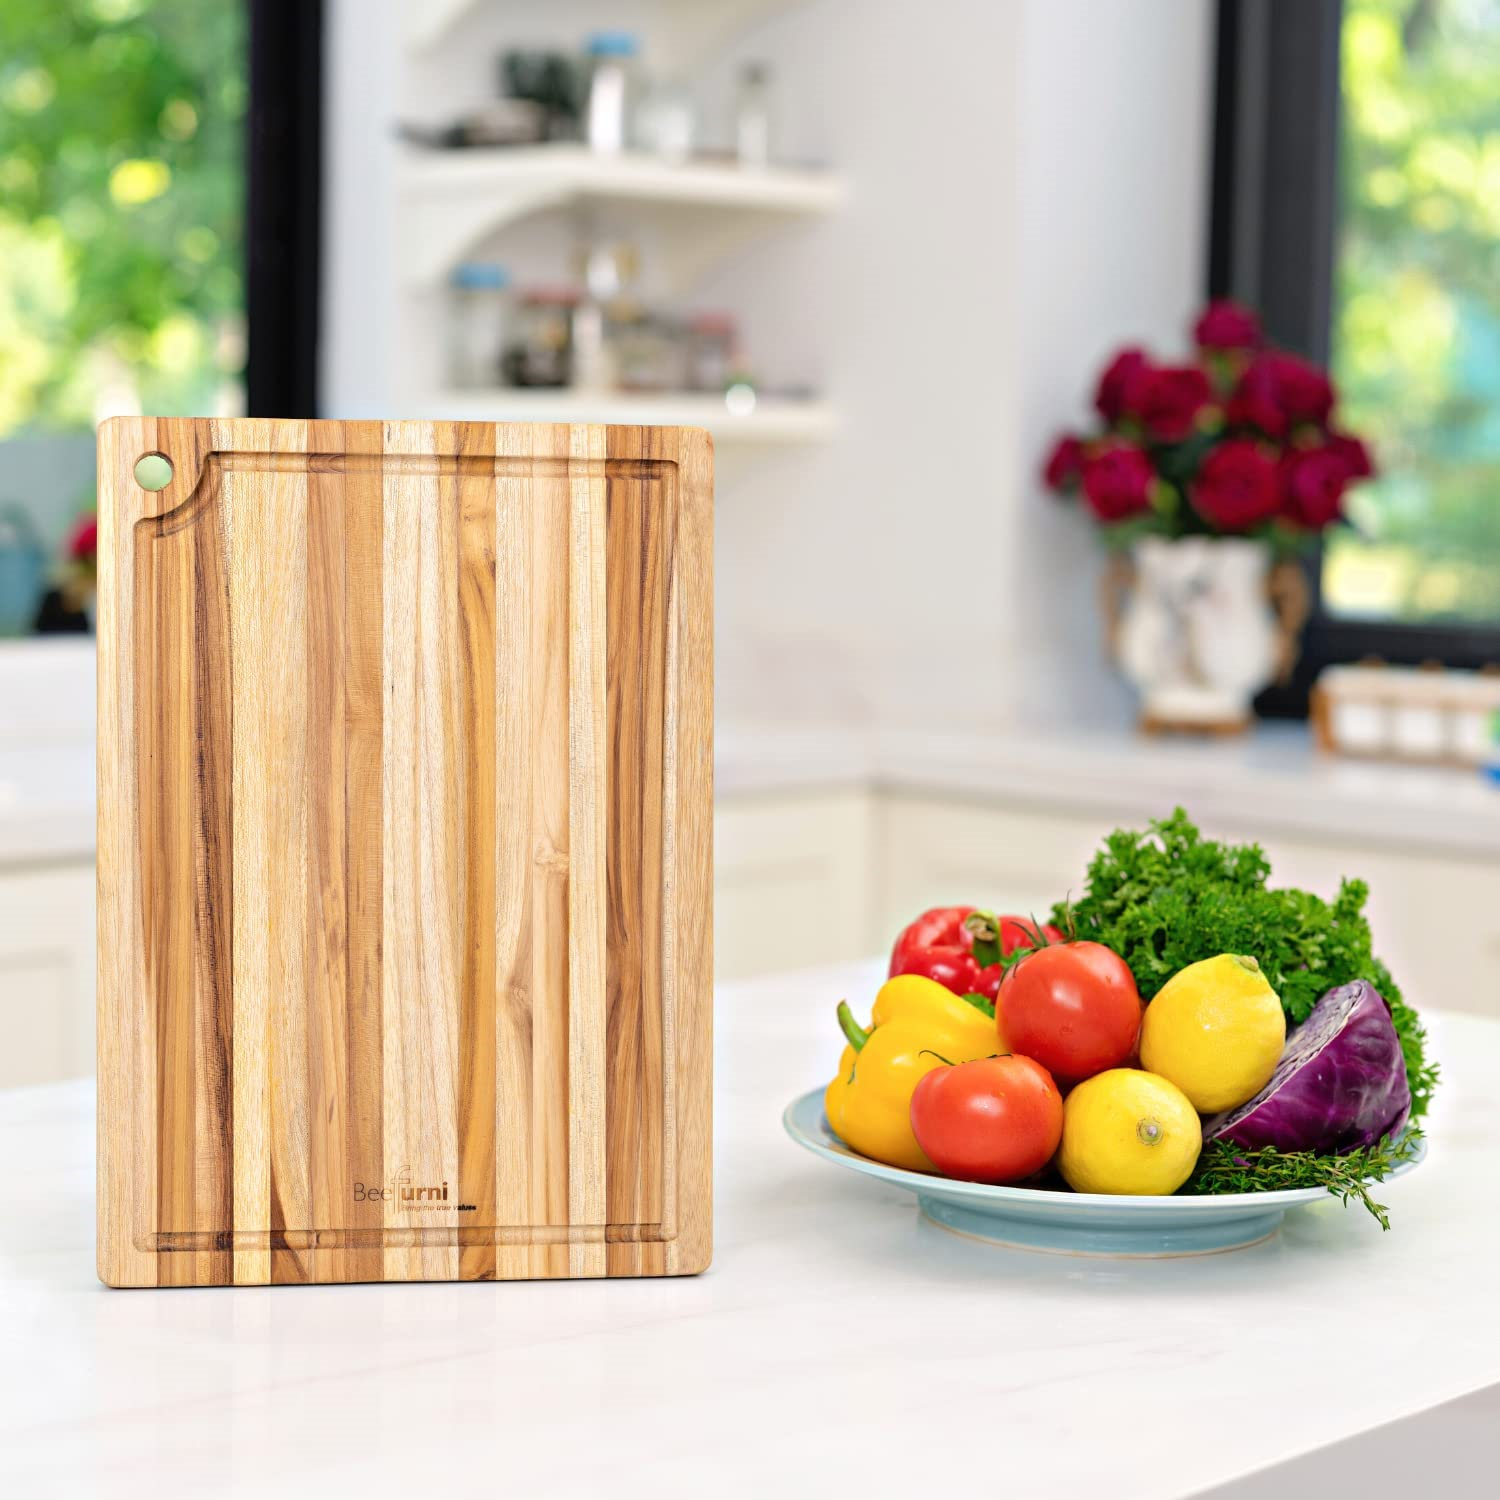 Teak Wood Cutting Board With Hand Grip Wooden Cutting Boards For Kitchen  Medium Chopping Board Wood Christmas Exchange Gifts(20 X 15 X 1.25 Inches)